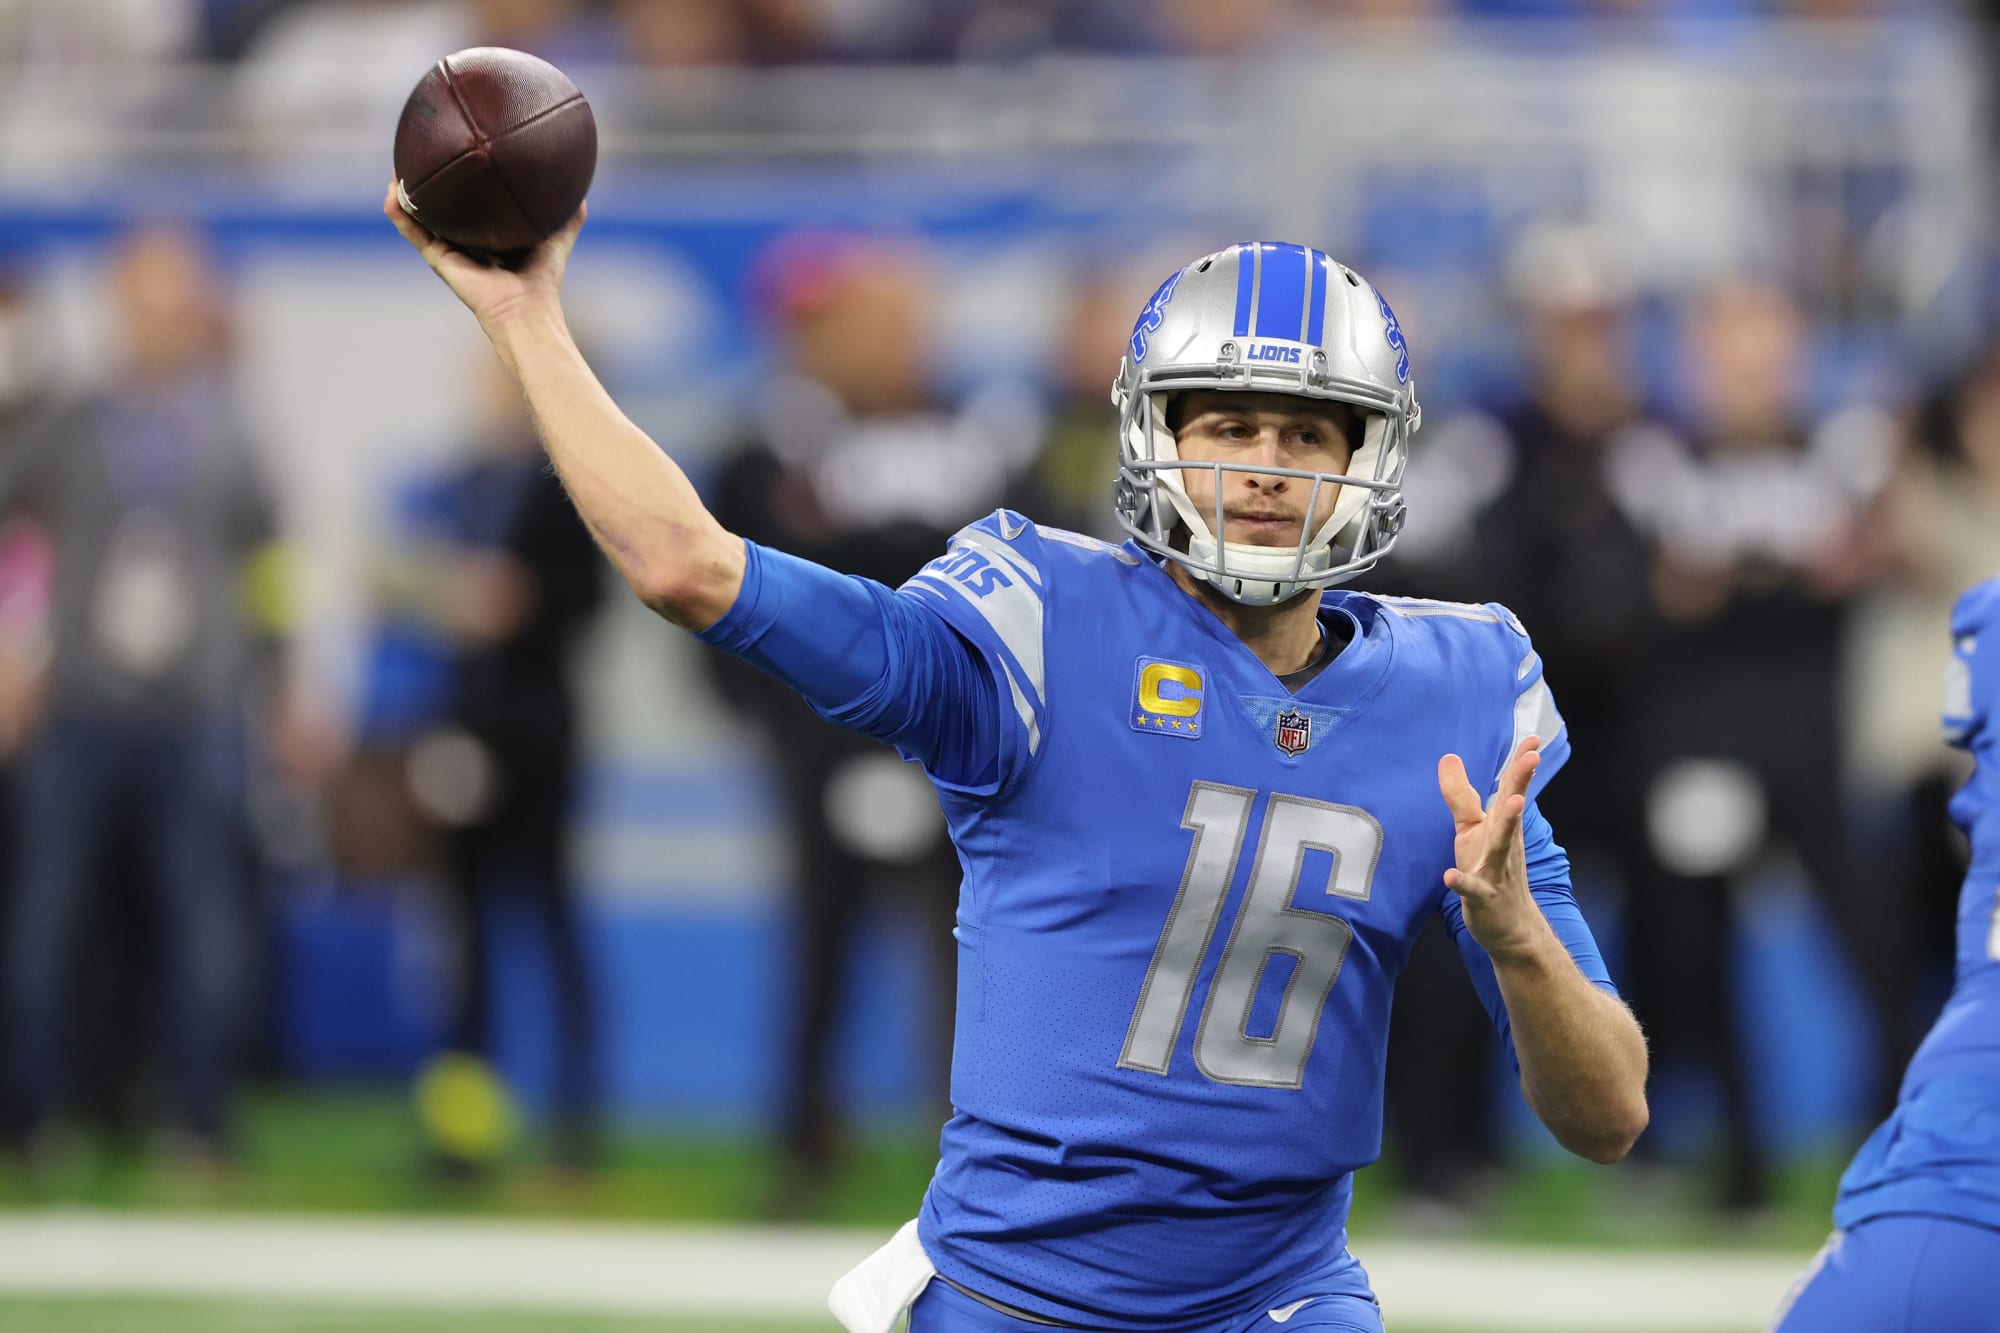 Lions quarterback Jared Goff belongs on fantasy benches in Week 15 vs